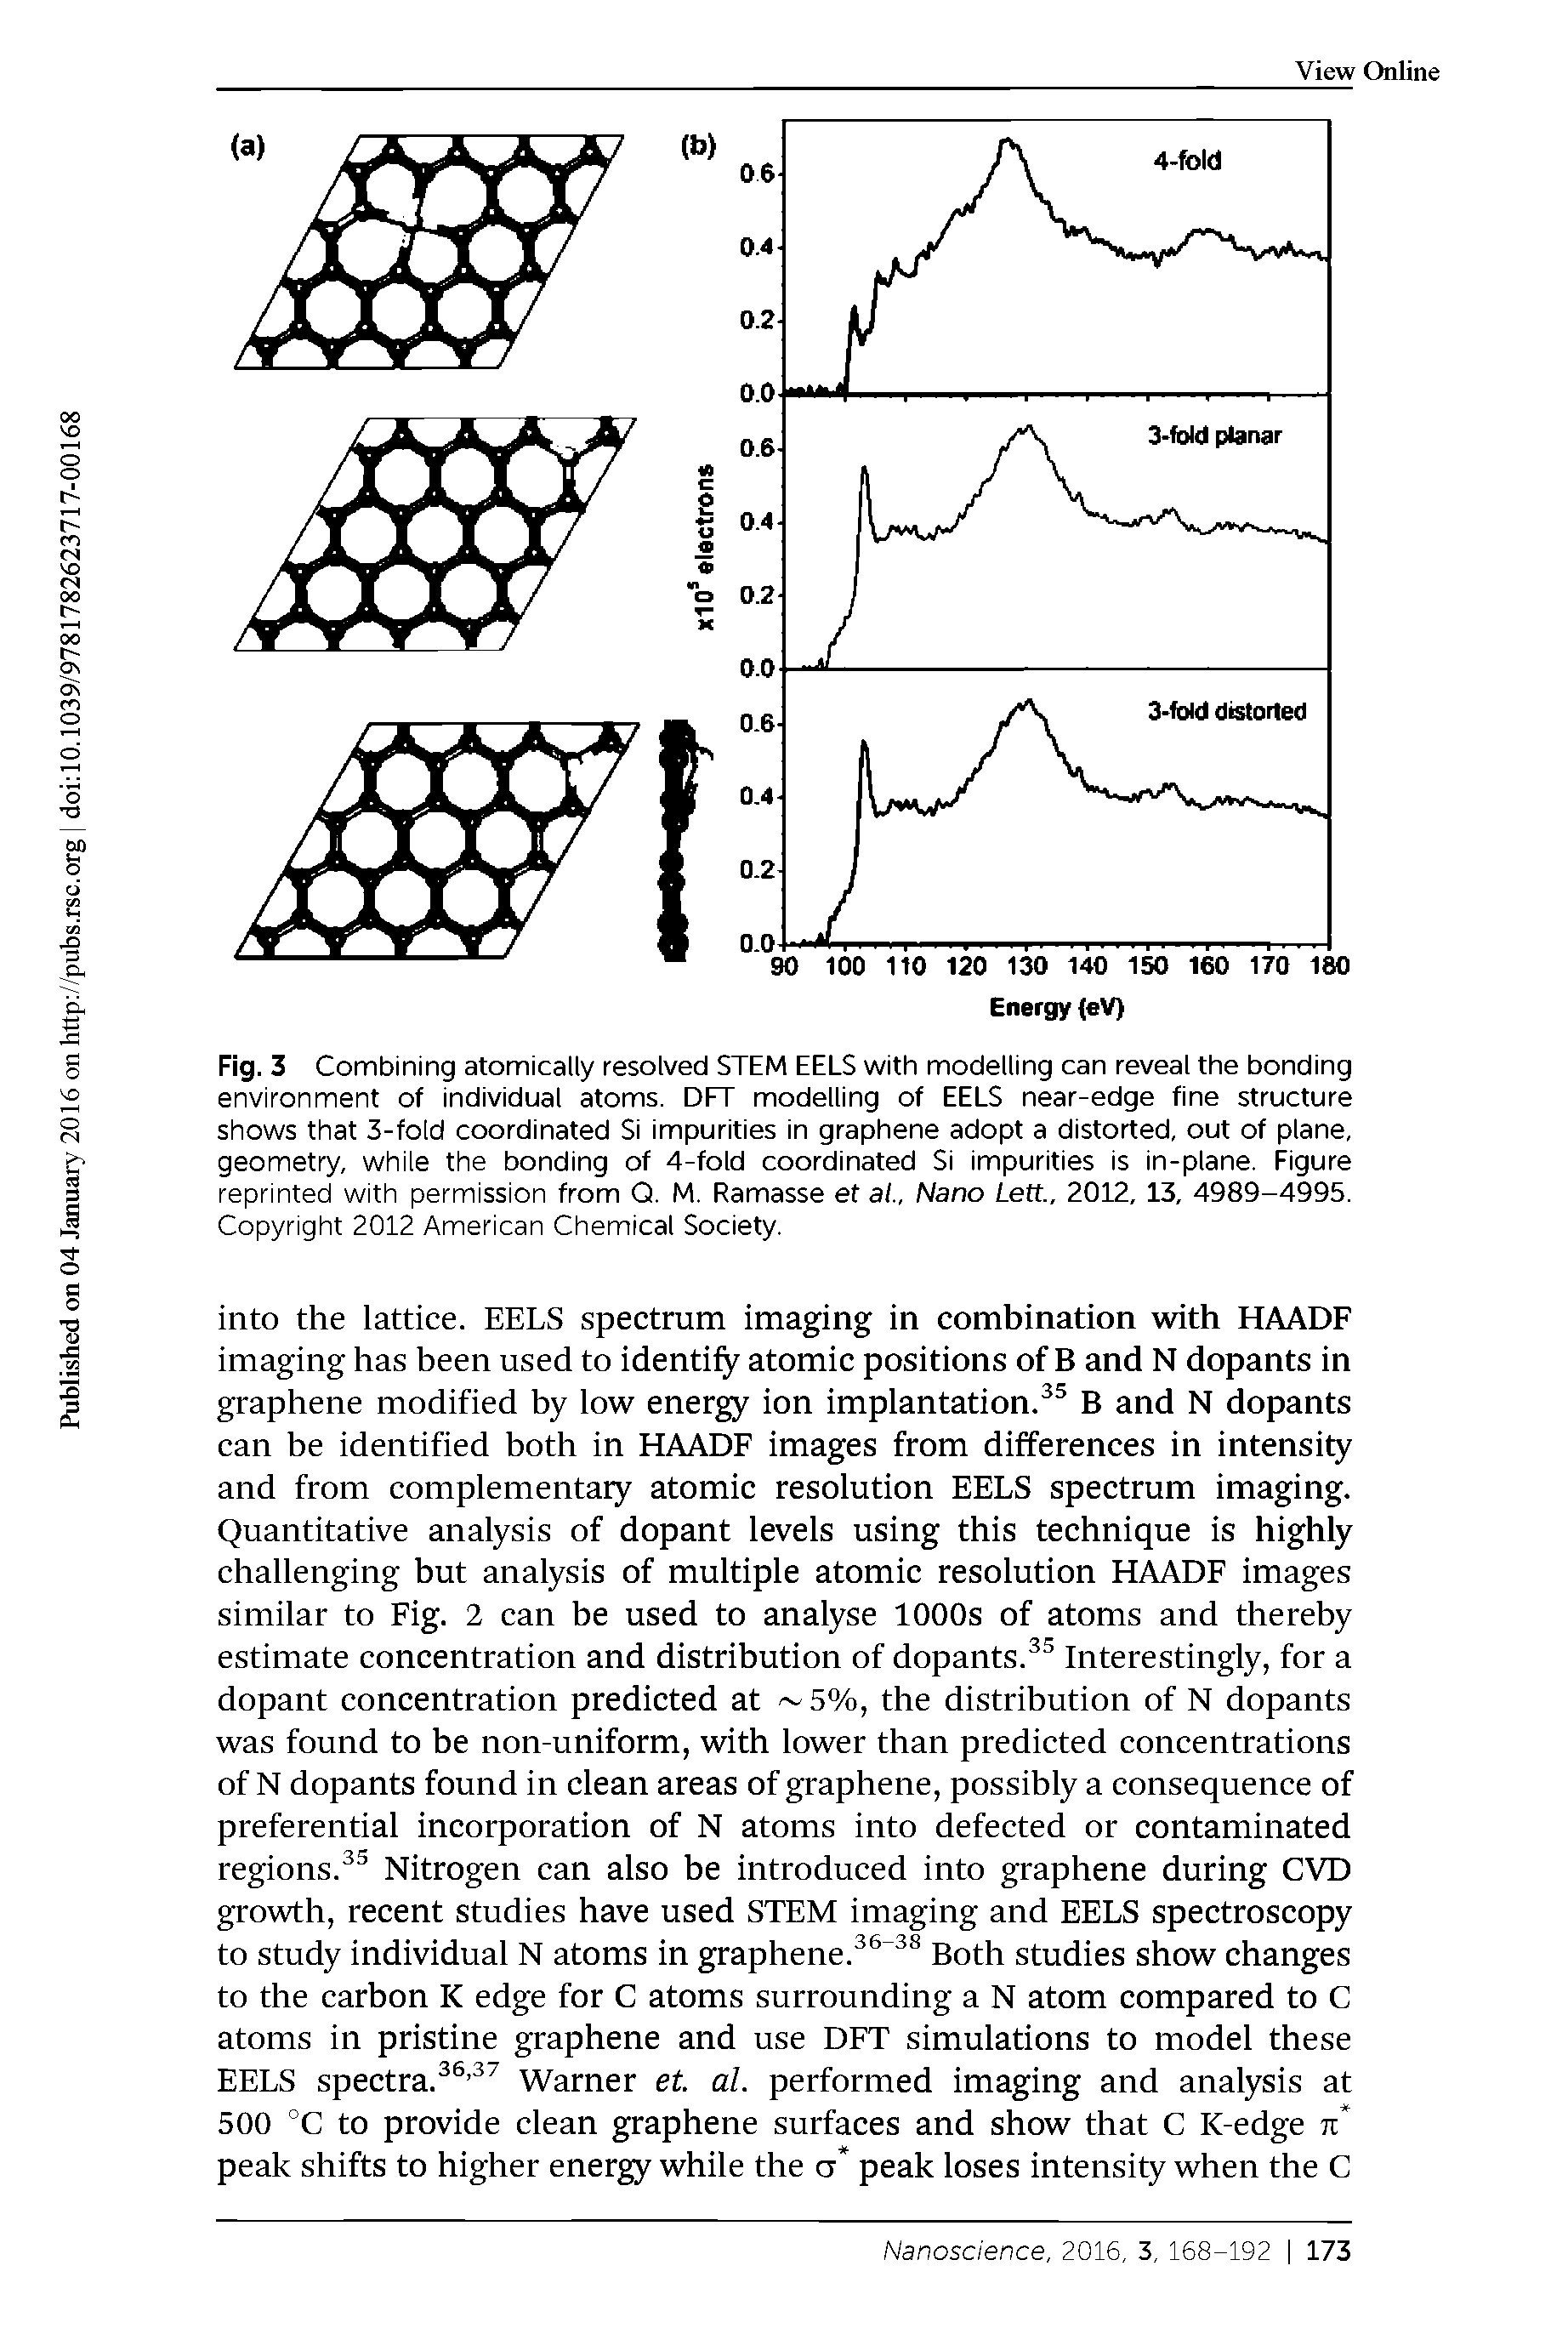 Fig. 3 Combining atomically resolved STEM EELS with modelling can reveal the bonding environment of individual atoms. DFT modelling of EELS near-edge fine structure shows that 3-fold coordinated Si impurities in graphene adopt a distorted, out of plane, geometry, while the bonding of 4-fold coordinated Si impurities is in-plane. Figure reprinted with permission from Q. M. Ramasse eta/.. Nano Lett., 2012, 13, 4989-4995. Copyright 2012 American Chemical Society.